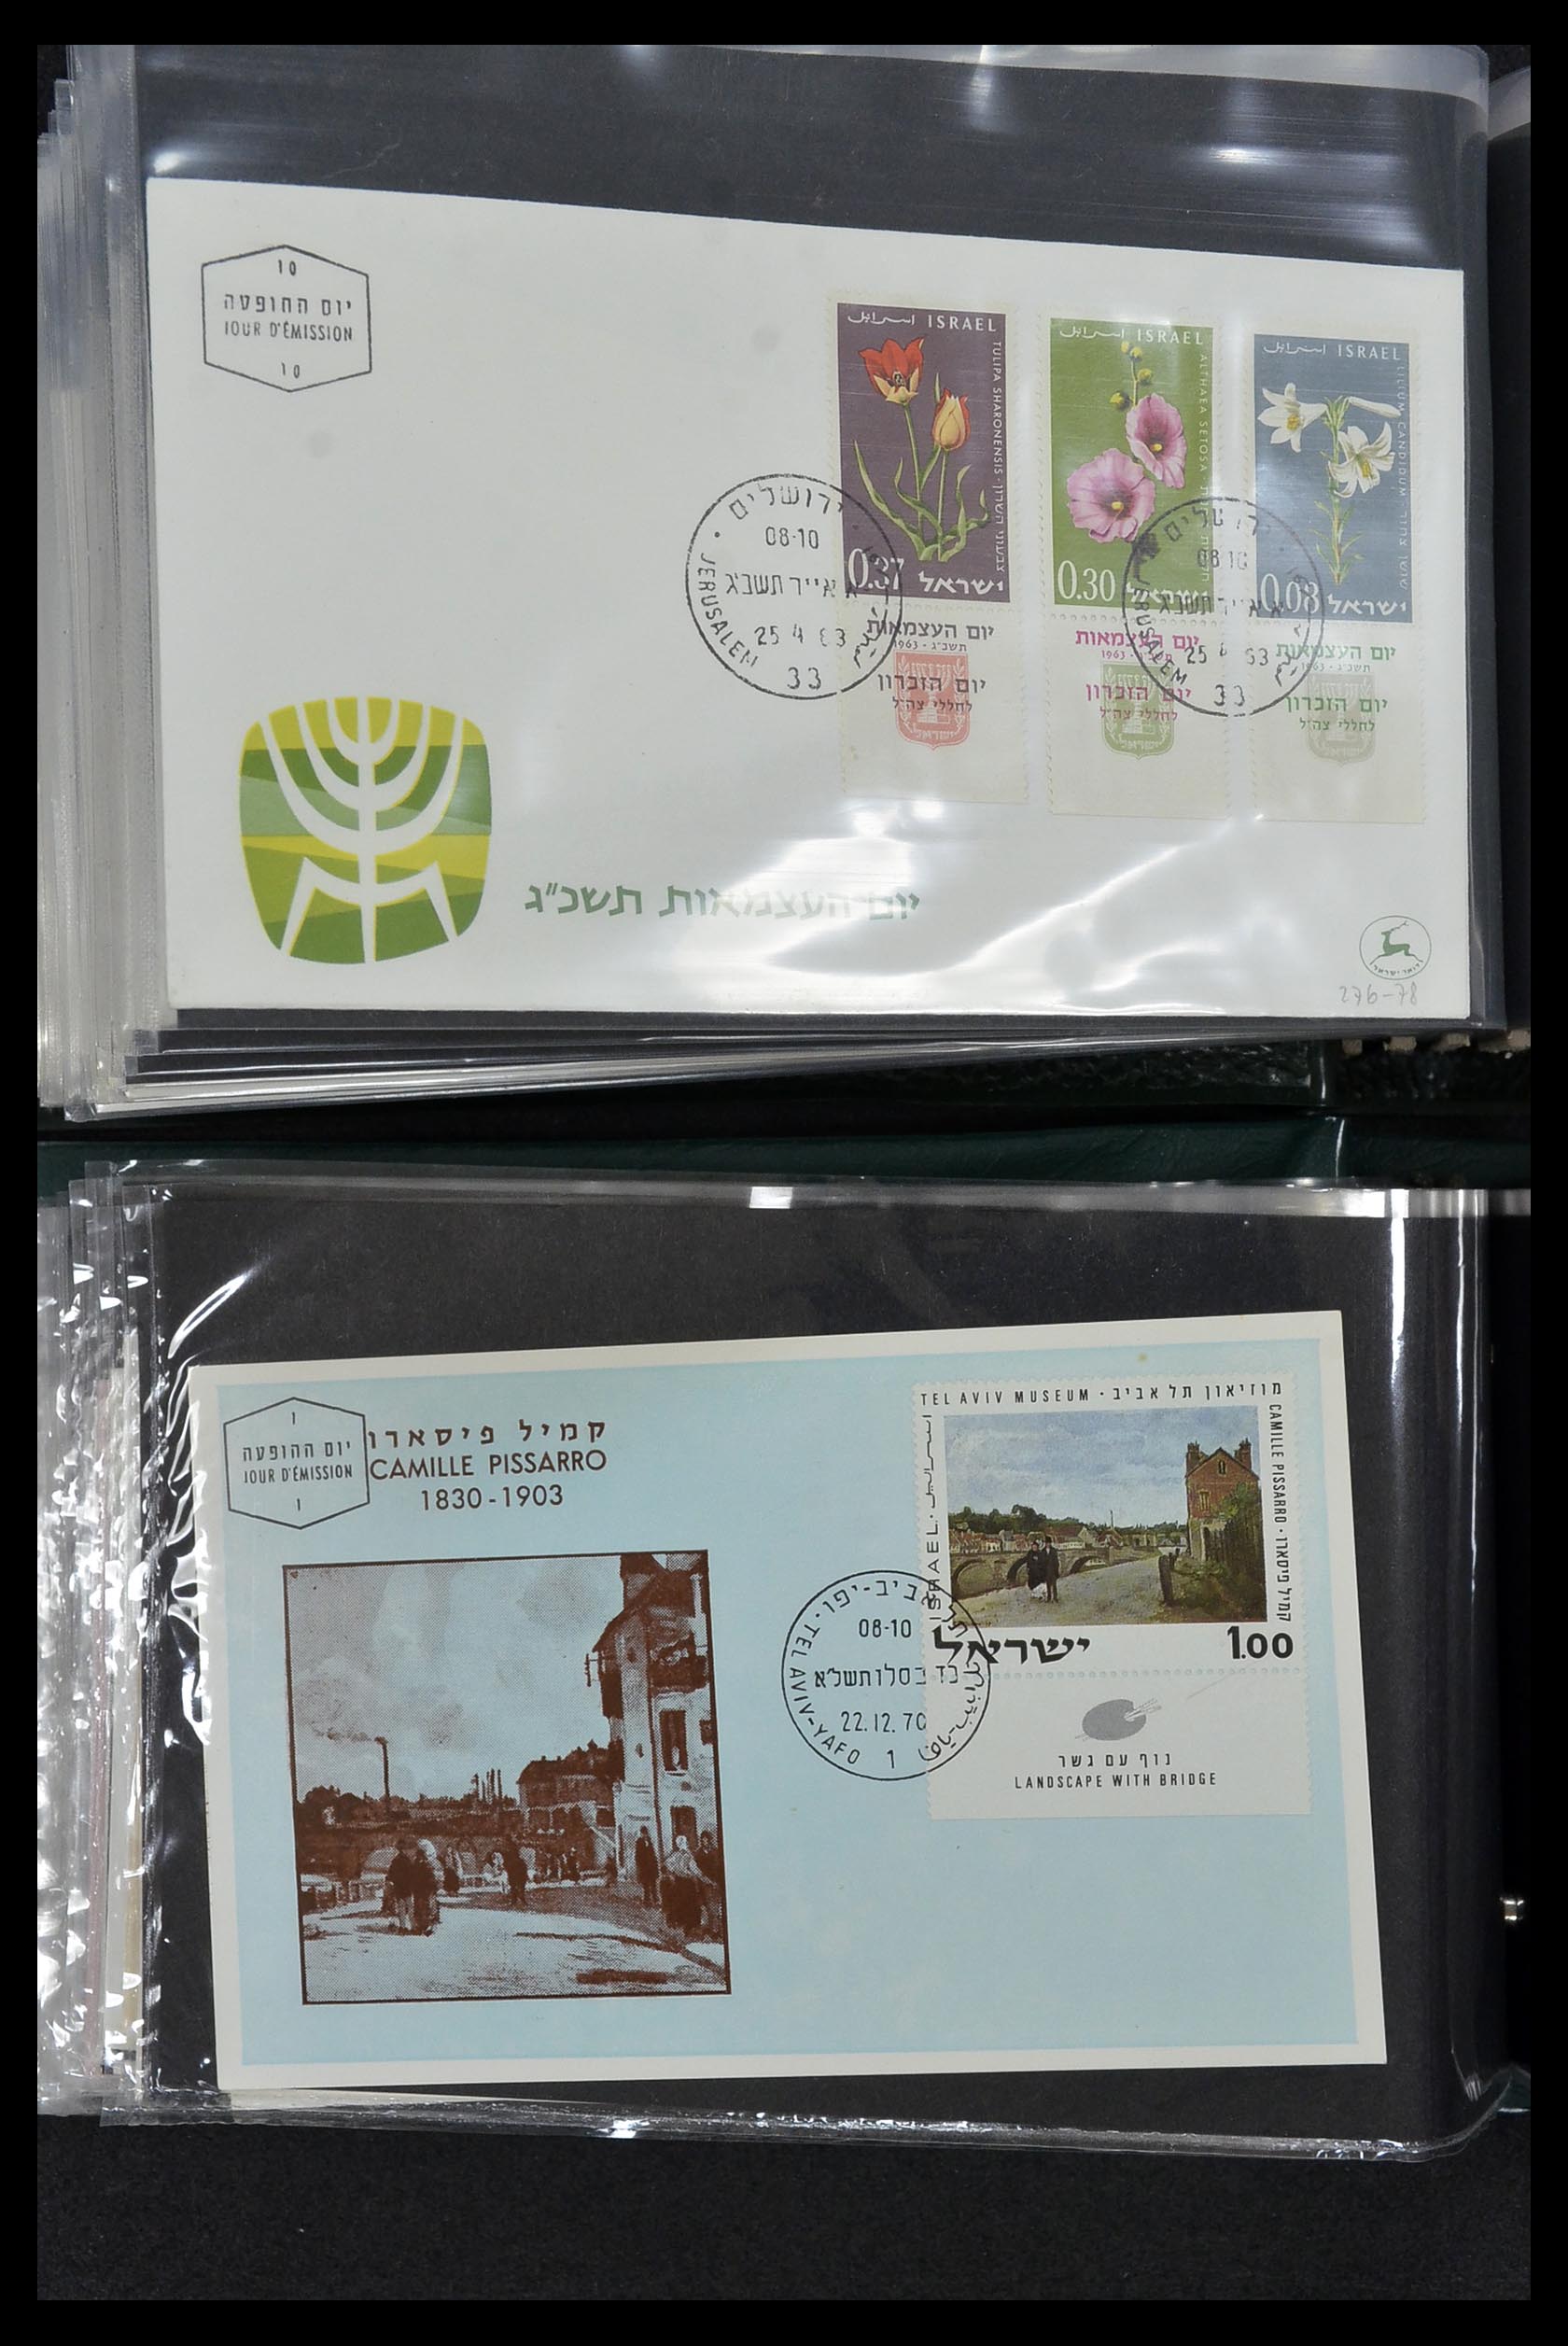 34217 072 - Stamp collection 34217 Israël covers and FDC's 1949-1985.